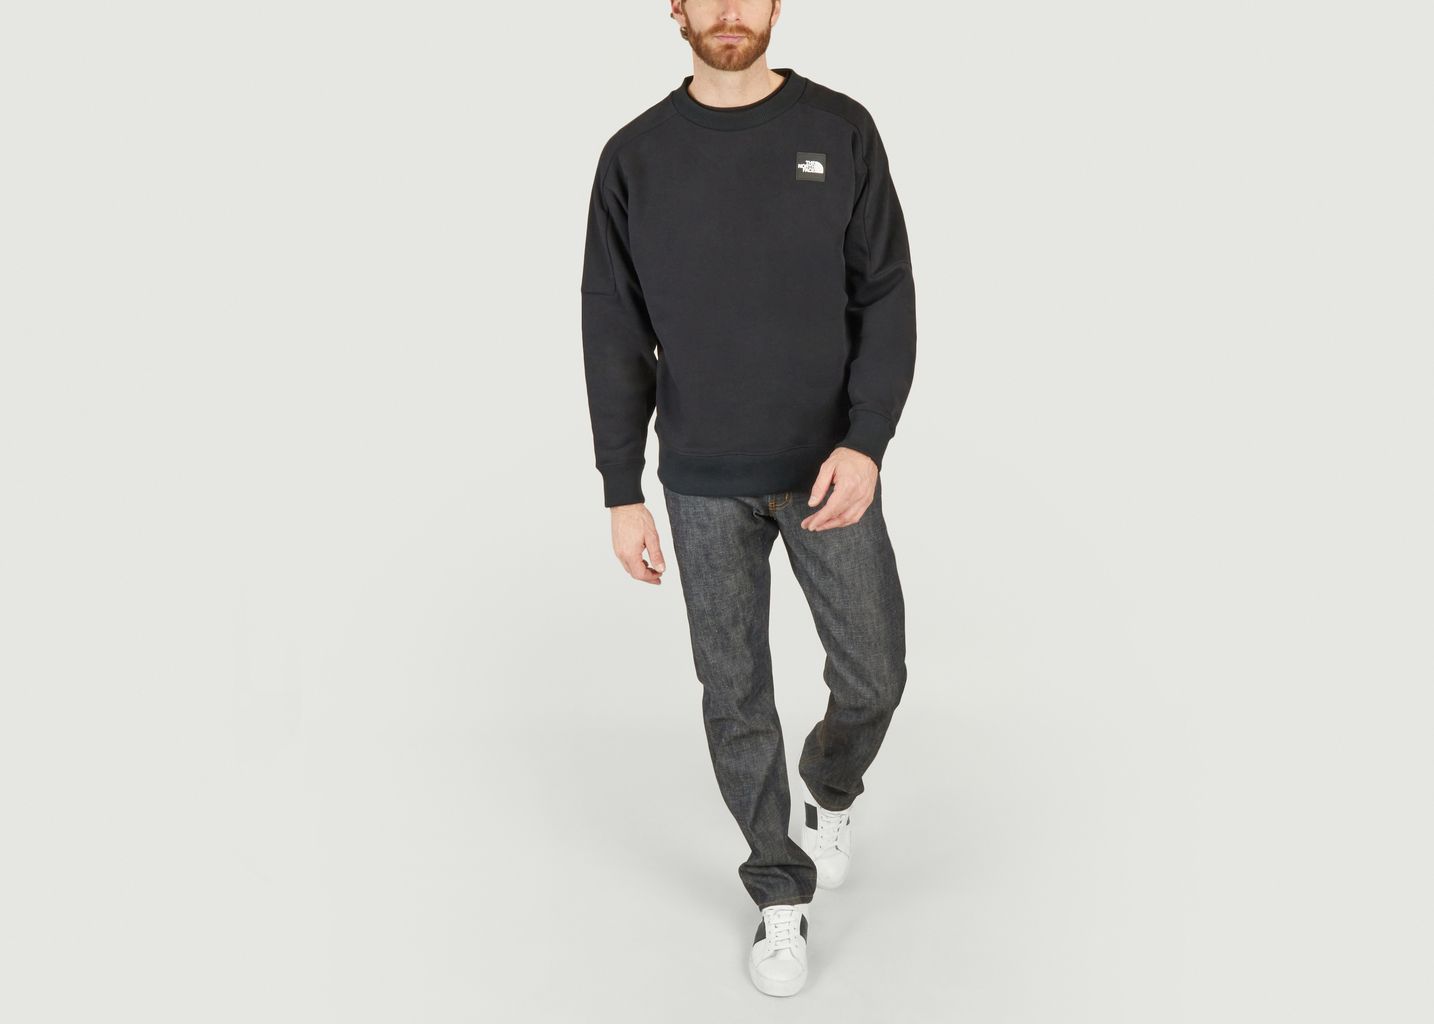 Sweat The 489 - The North Face